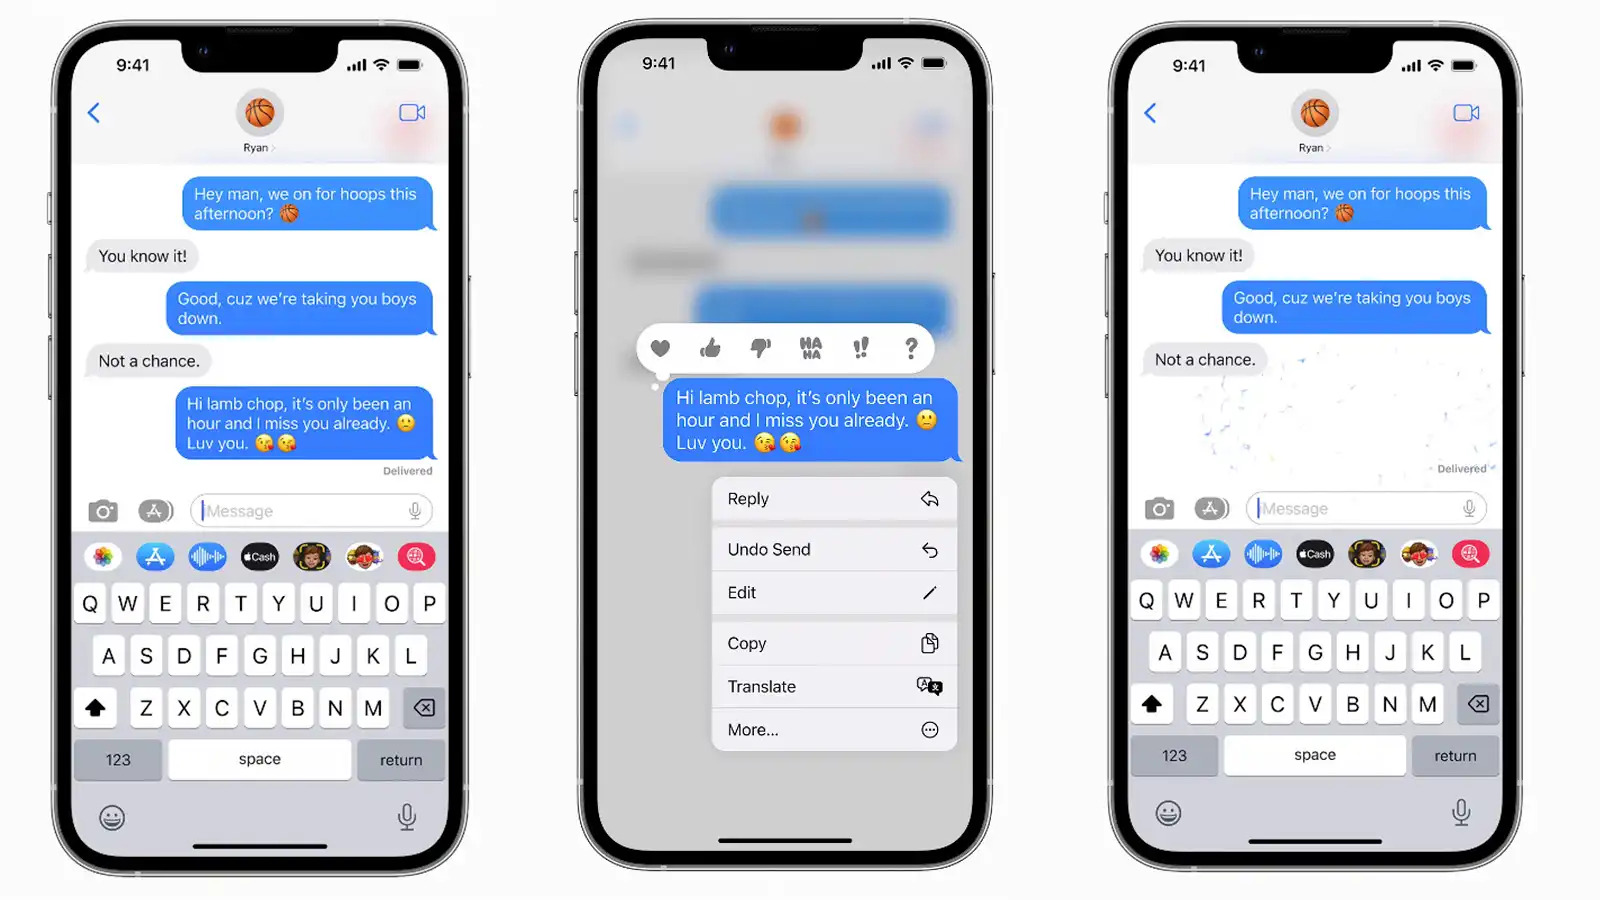 how-to-edit-and-unsend-messages-on-your-iphone-with-ios-16